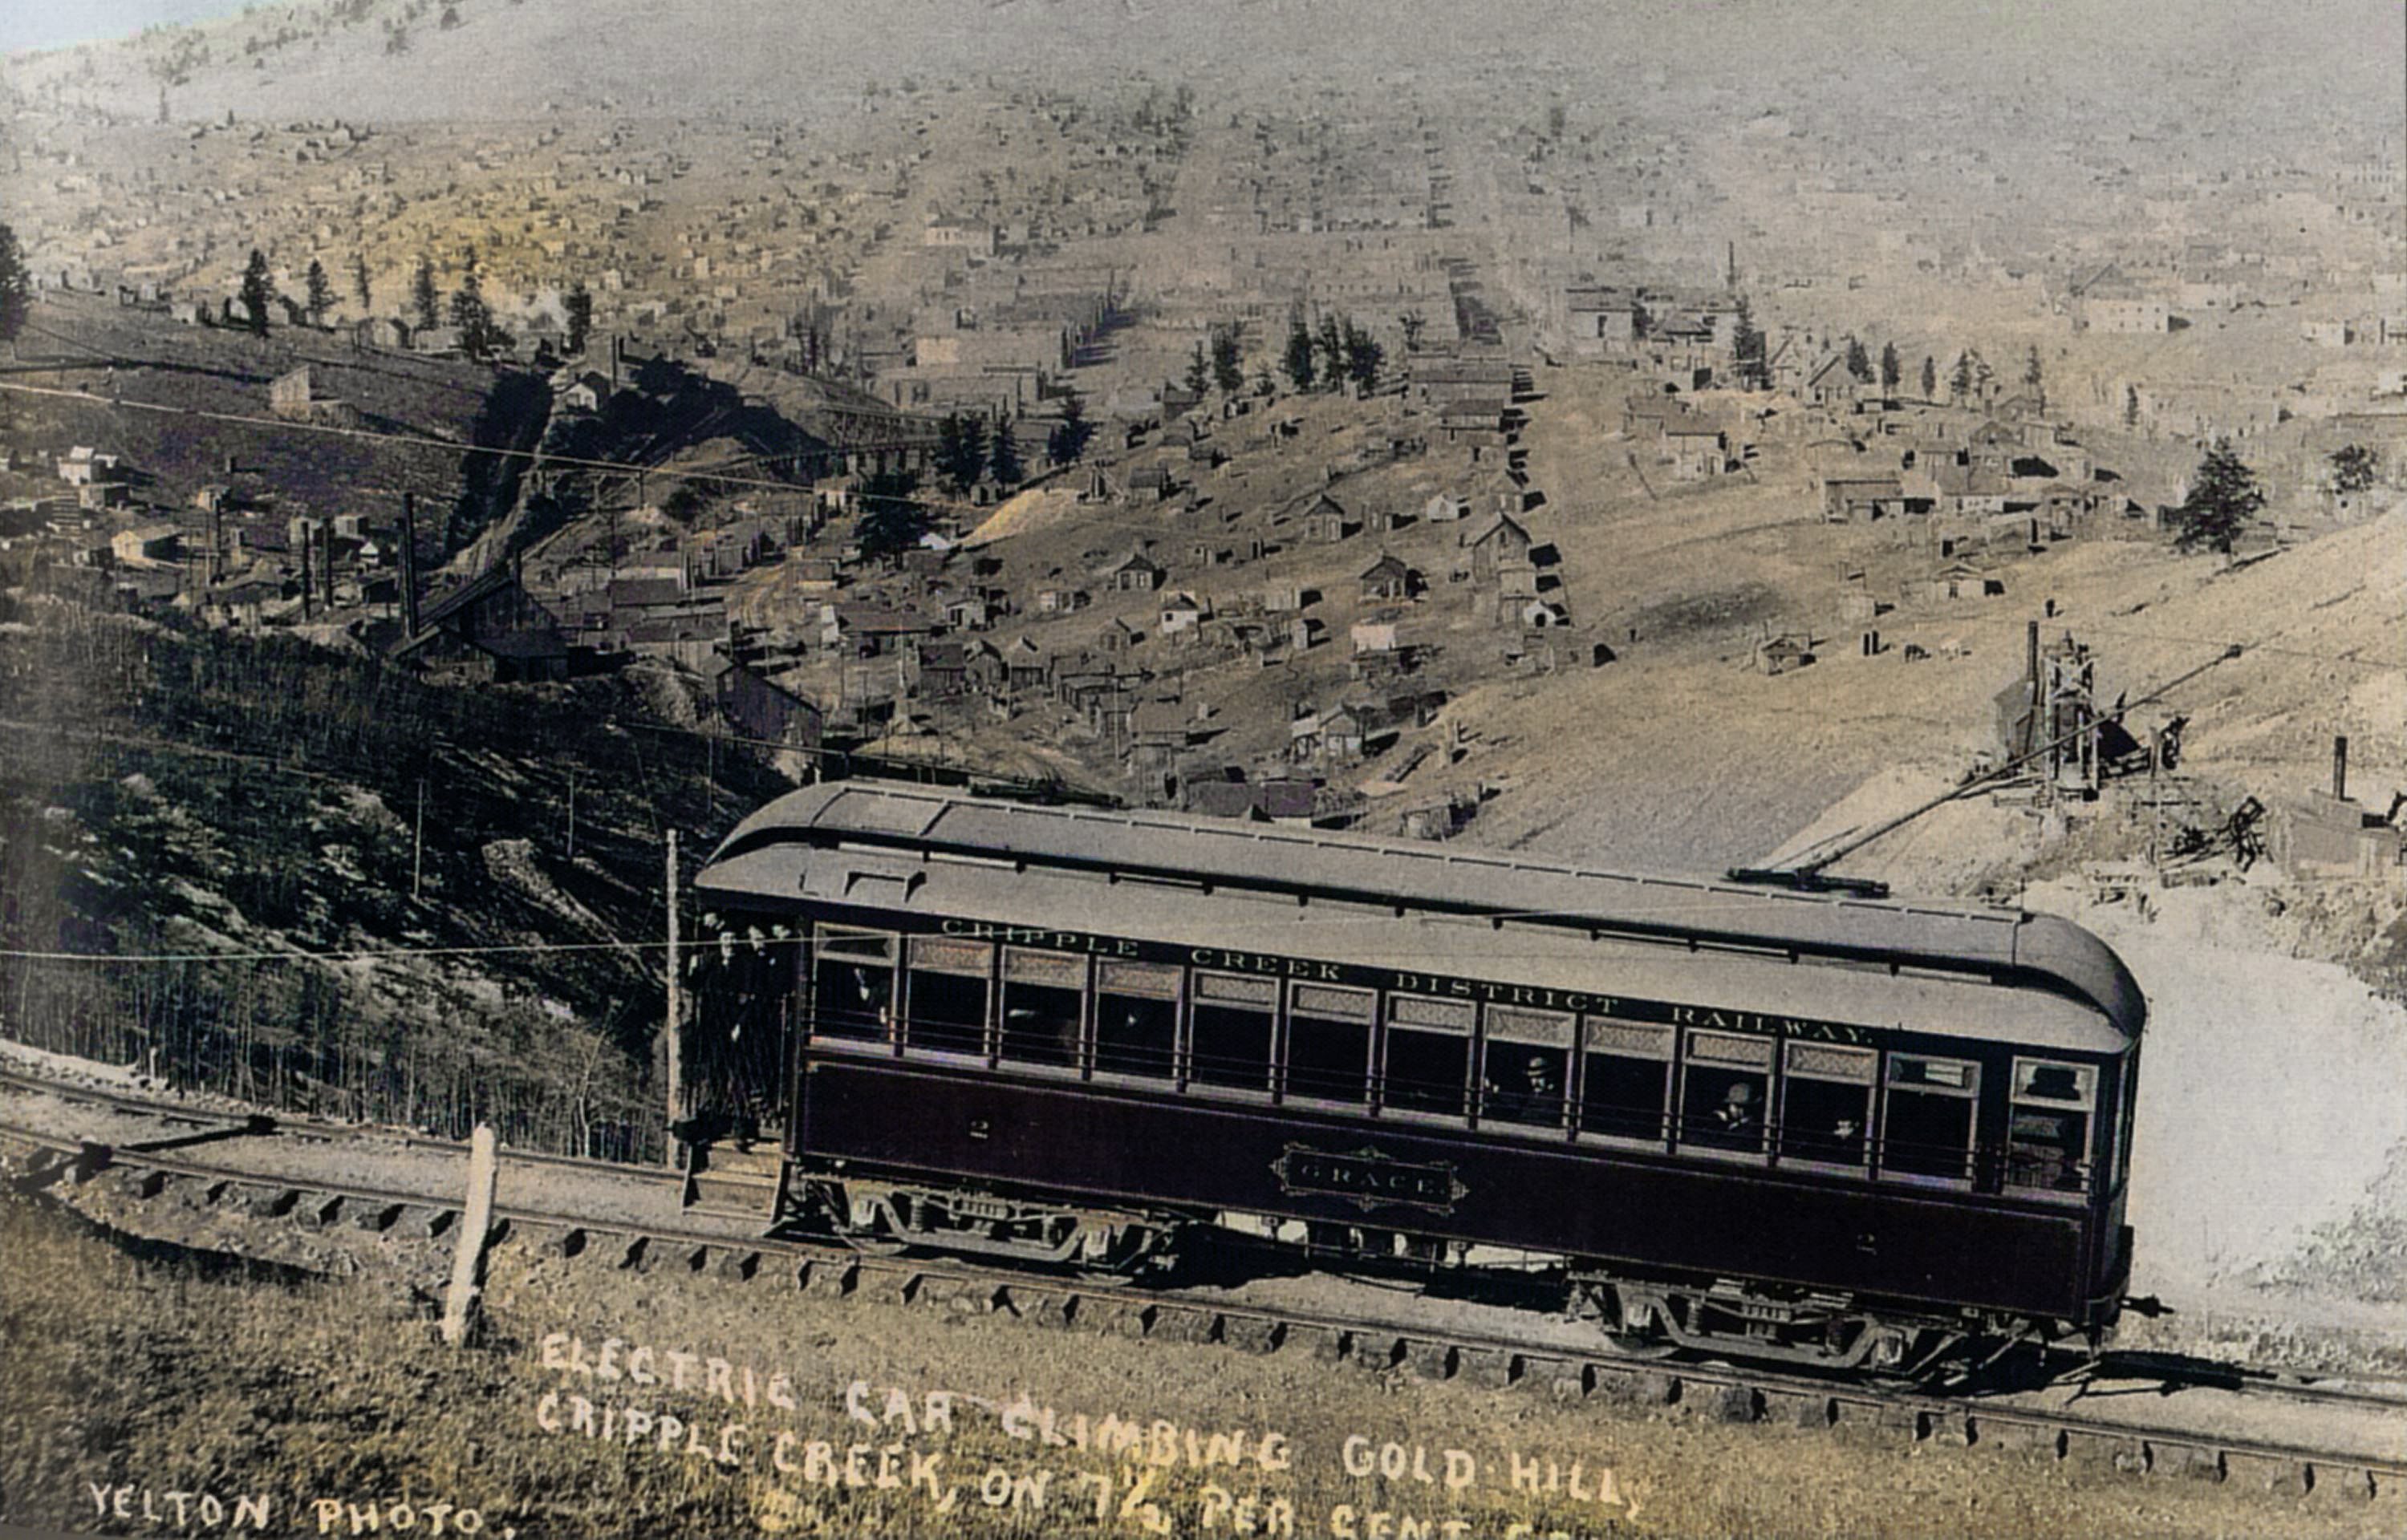 View of the Trolley car named Grace who poses on the 7.5 percent grade on the west slope of Gold Hill, climbing Gold Hill above Poverty Gulch and high above Cripple Creek, along the original steep High Line grade. In 1902 the line was rerouted over a less steep alignment.
* The two Head-frame type of mine operations seen just above the lower end/back end of the Trolley is as far as I can tell operations on the May Queen lode claim on the left and the Granite Hill lode claim on the right.
* About 2/3 up from bottom and about 1/4 in from left-hand side is the structures of the Abe Lincoln Mine, and way down in the gulch one see the M.T. Wye Trestles at the Depot grounds and to the left of them is the spur to the top of the Midland Sampler seen cutting up the hill from a spur a little down from the Abe Lincoln.
   I did procure the colored version of this image. Source was grayish, or in common speech black & white. Used an online service and tweaked and worked with image to get what looks best to my eyes at the moment.